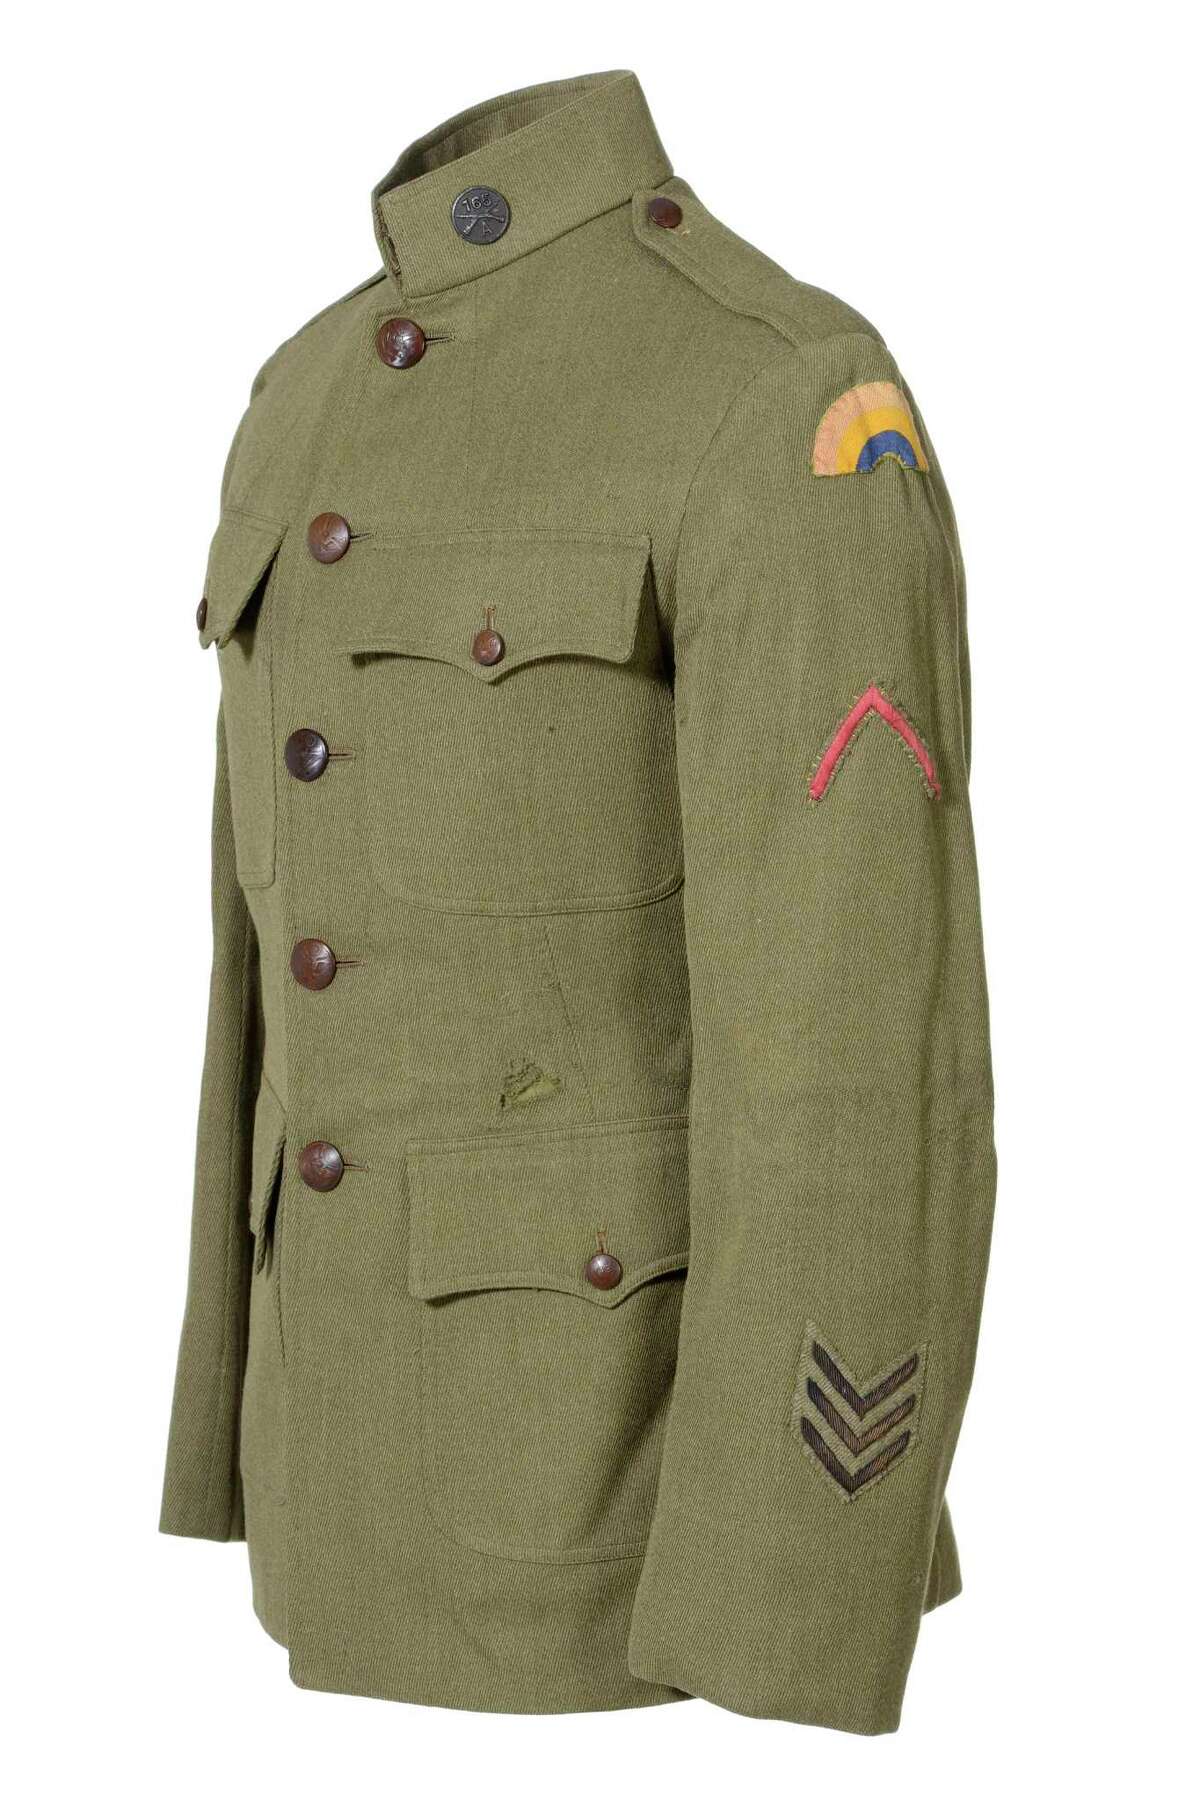 The State Museum in Albany exhibit on the centennial of World War I, A Spirit of Sacrifice: New York State in the First World War, will be on display from April 15, 2017, through June 3, 2018. Tunic, 165th Infantry Regiment. Courtesy: William F. Howard Collection. This tunic belonged to a soldier in the 165th Infantry Regiment. During training at Camp Mills, Long Island, the unit became part of the 42nd Division. (Courtesy of State Museum)